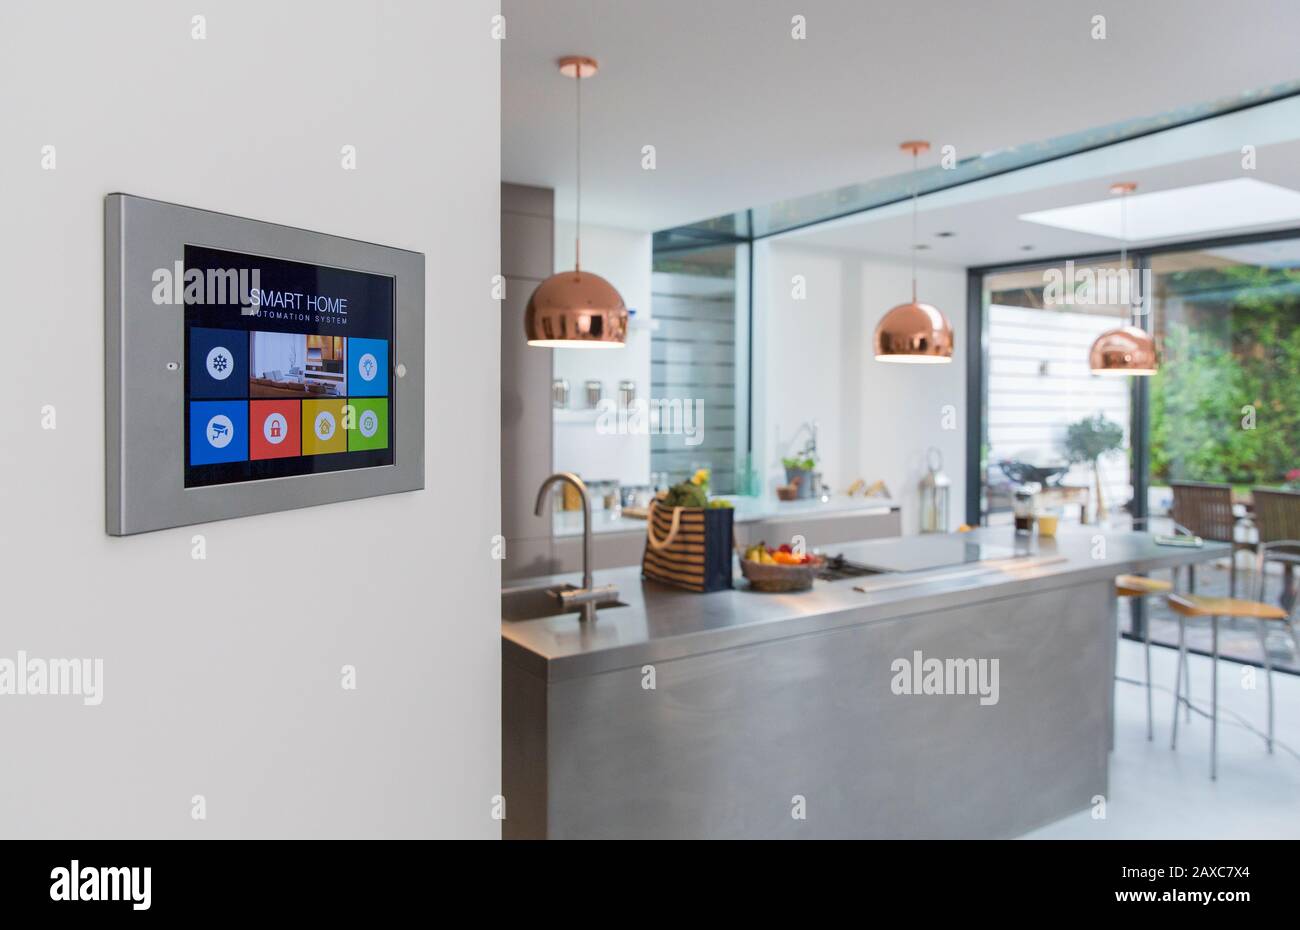 Smart home navigation system on wall in kitchen Stock Photo